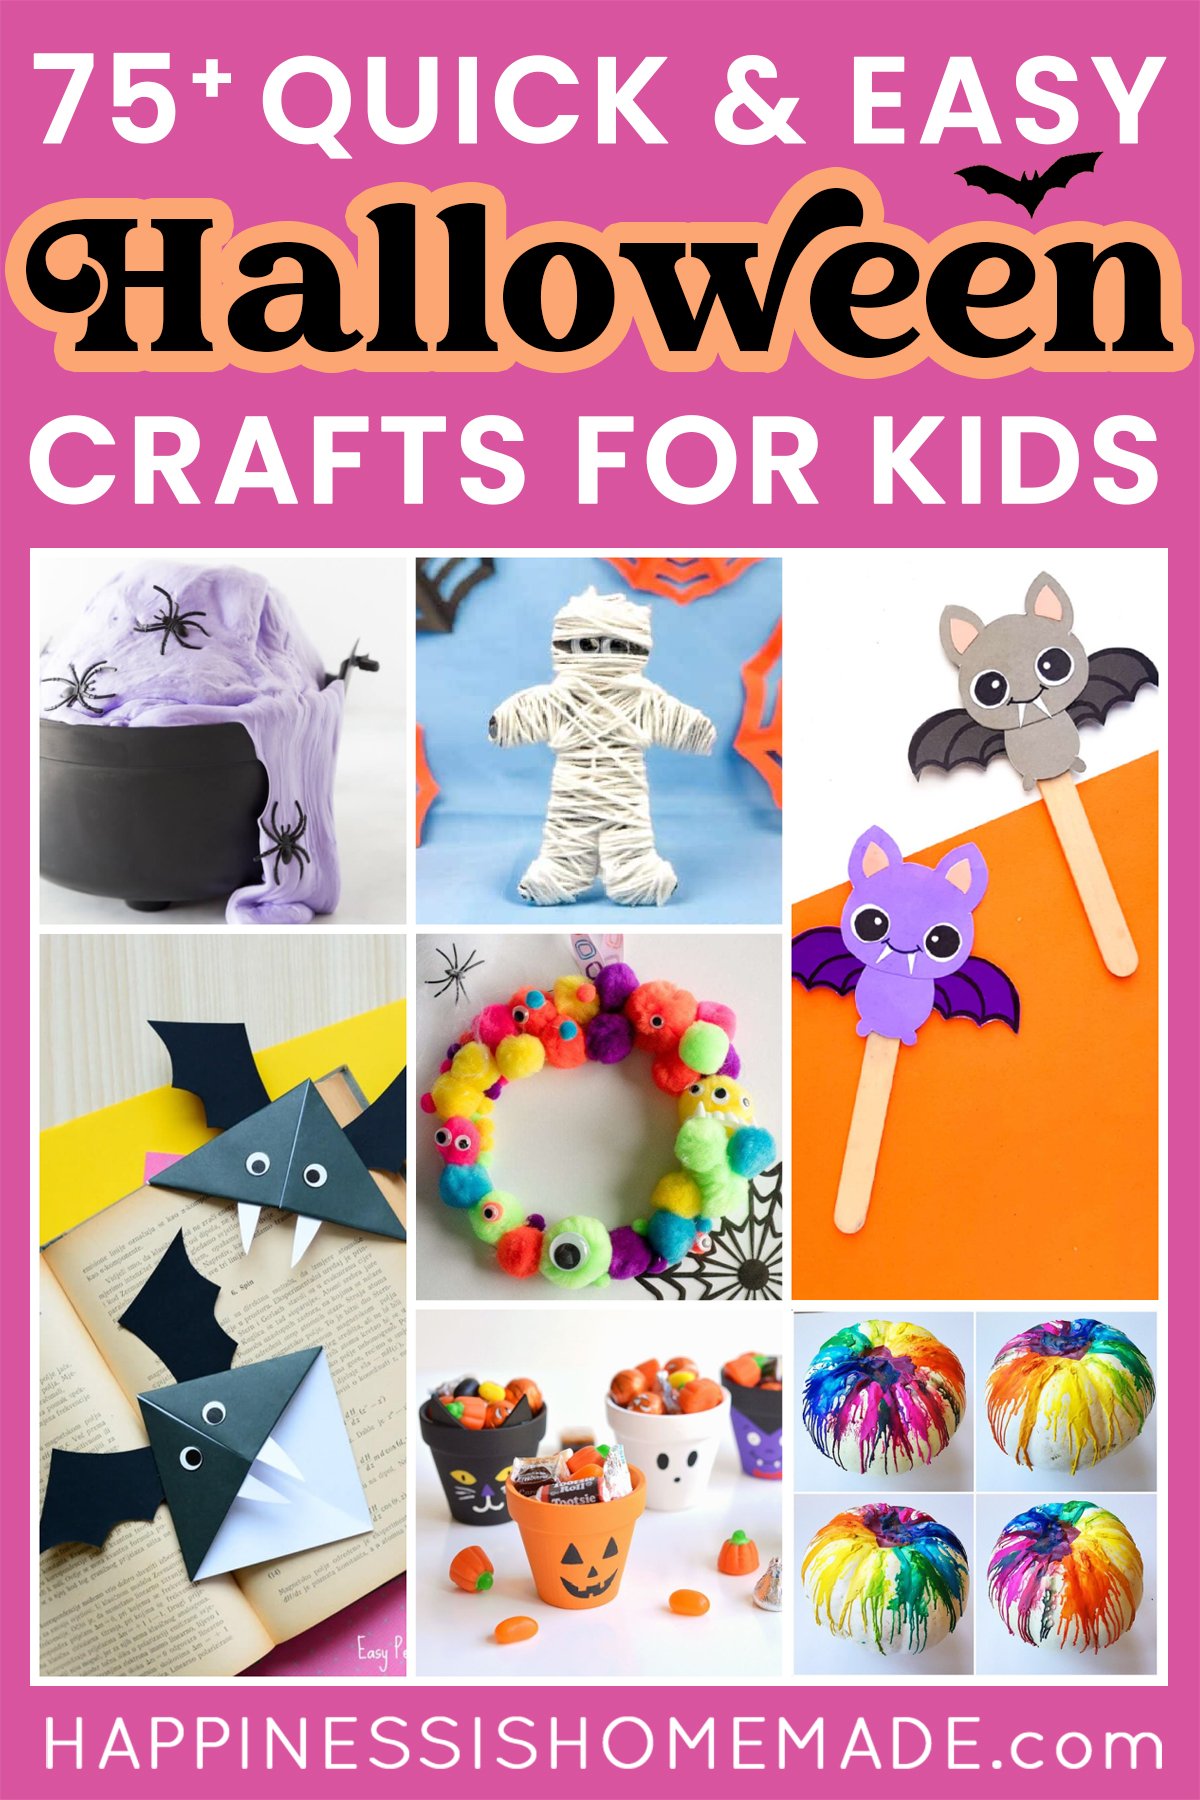 https://www.happinessishomemade.net/wp-content/uploads/2021/10/75-Quick-and-Easy-Halloween-Crafts-for-Kids-of-All-Ages.jpg